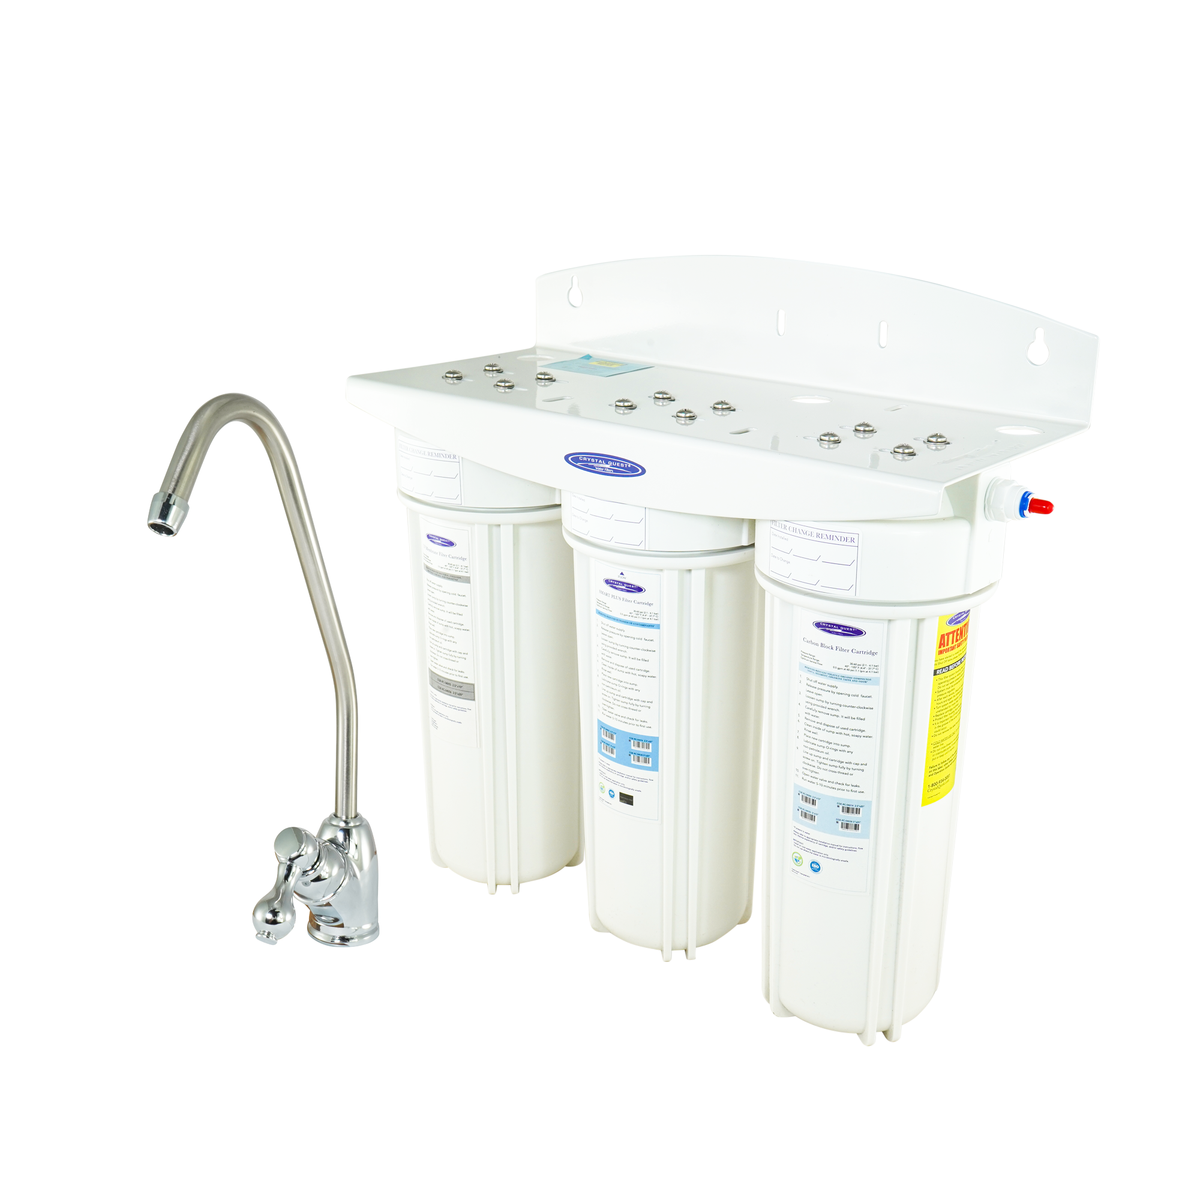 Triple Lead Under Sink Water Filter System - Under Sink Water Filters - Crystal Quest